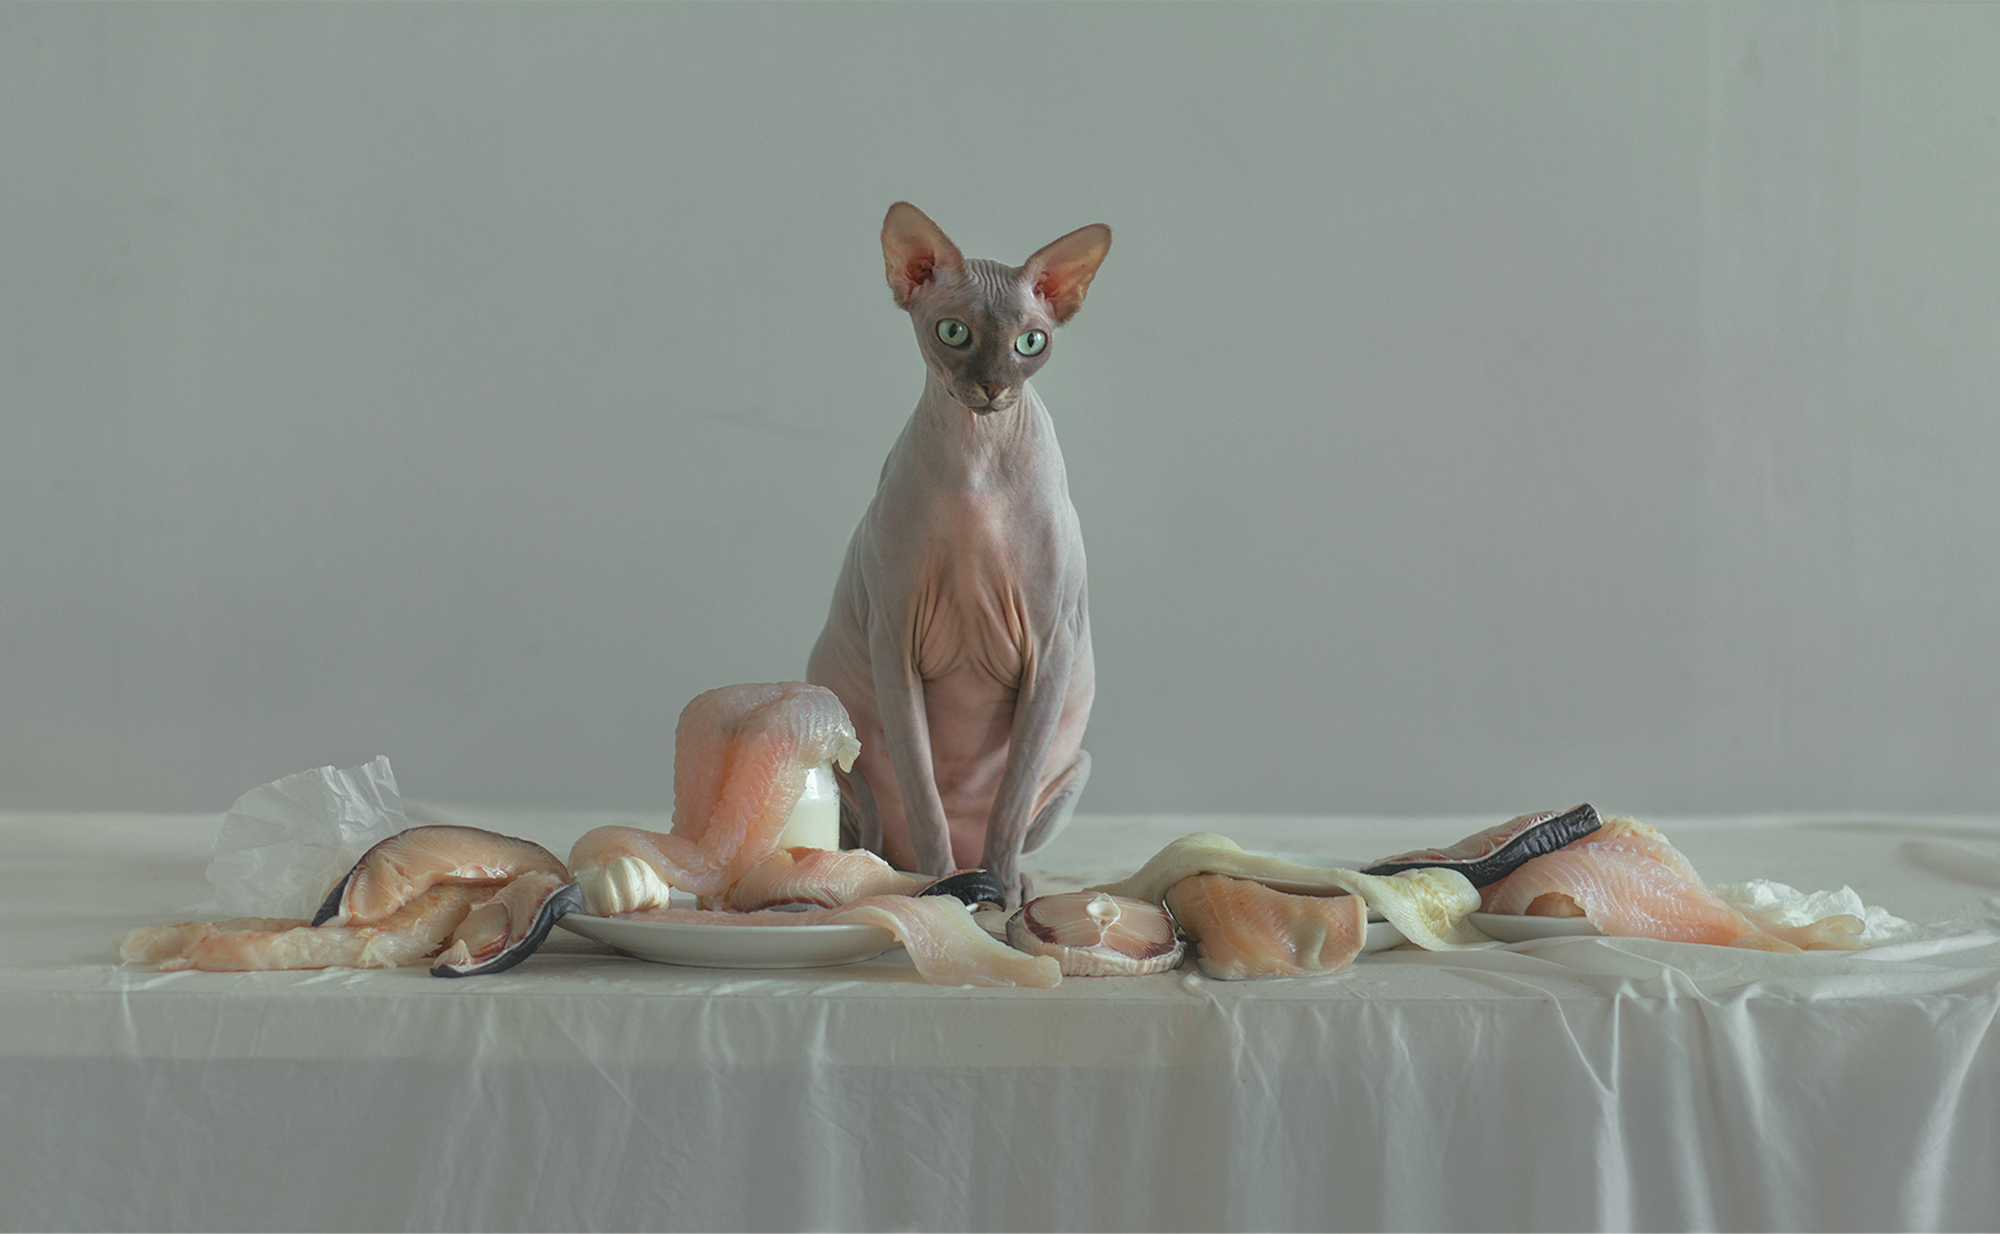 Evelyn Bencicova, An Organic (Still Life) - hairless cat and raw meat